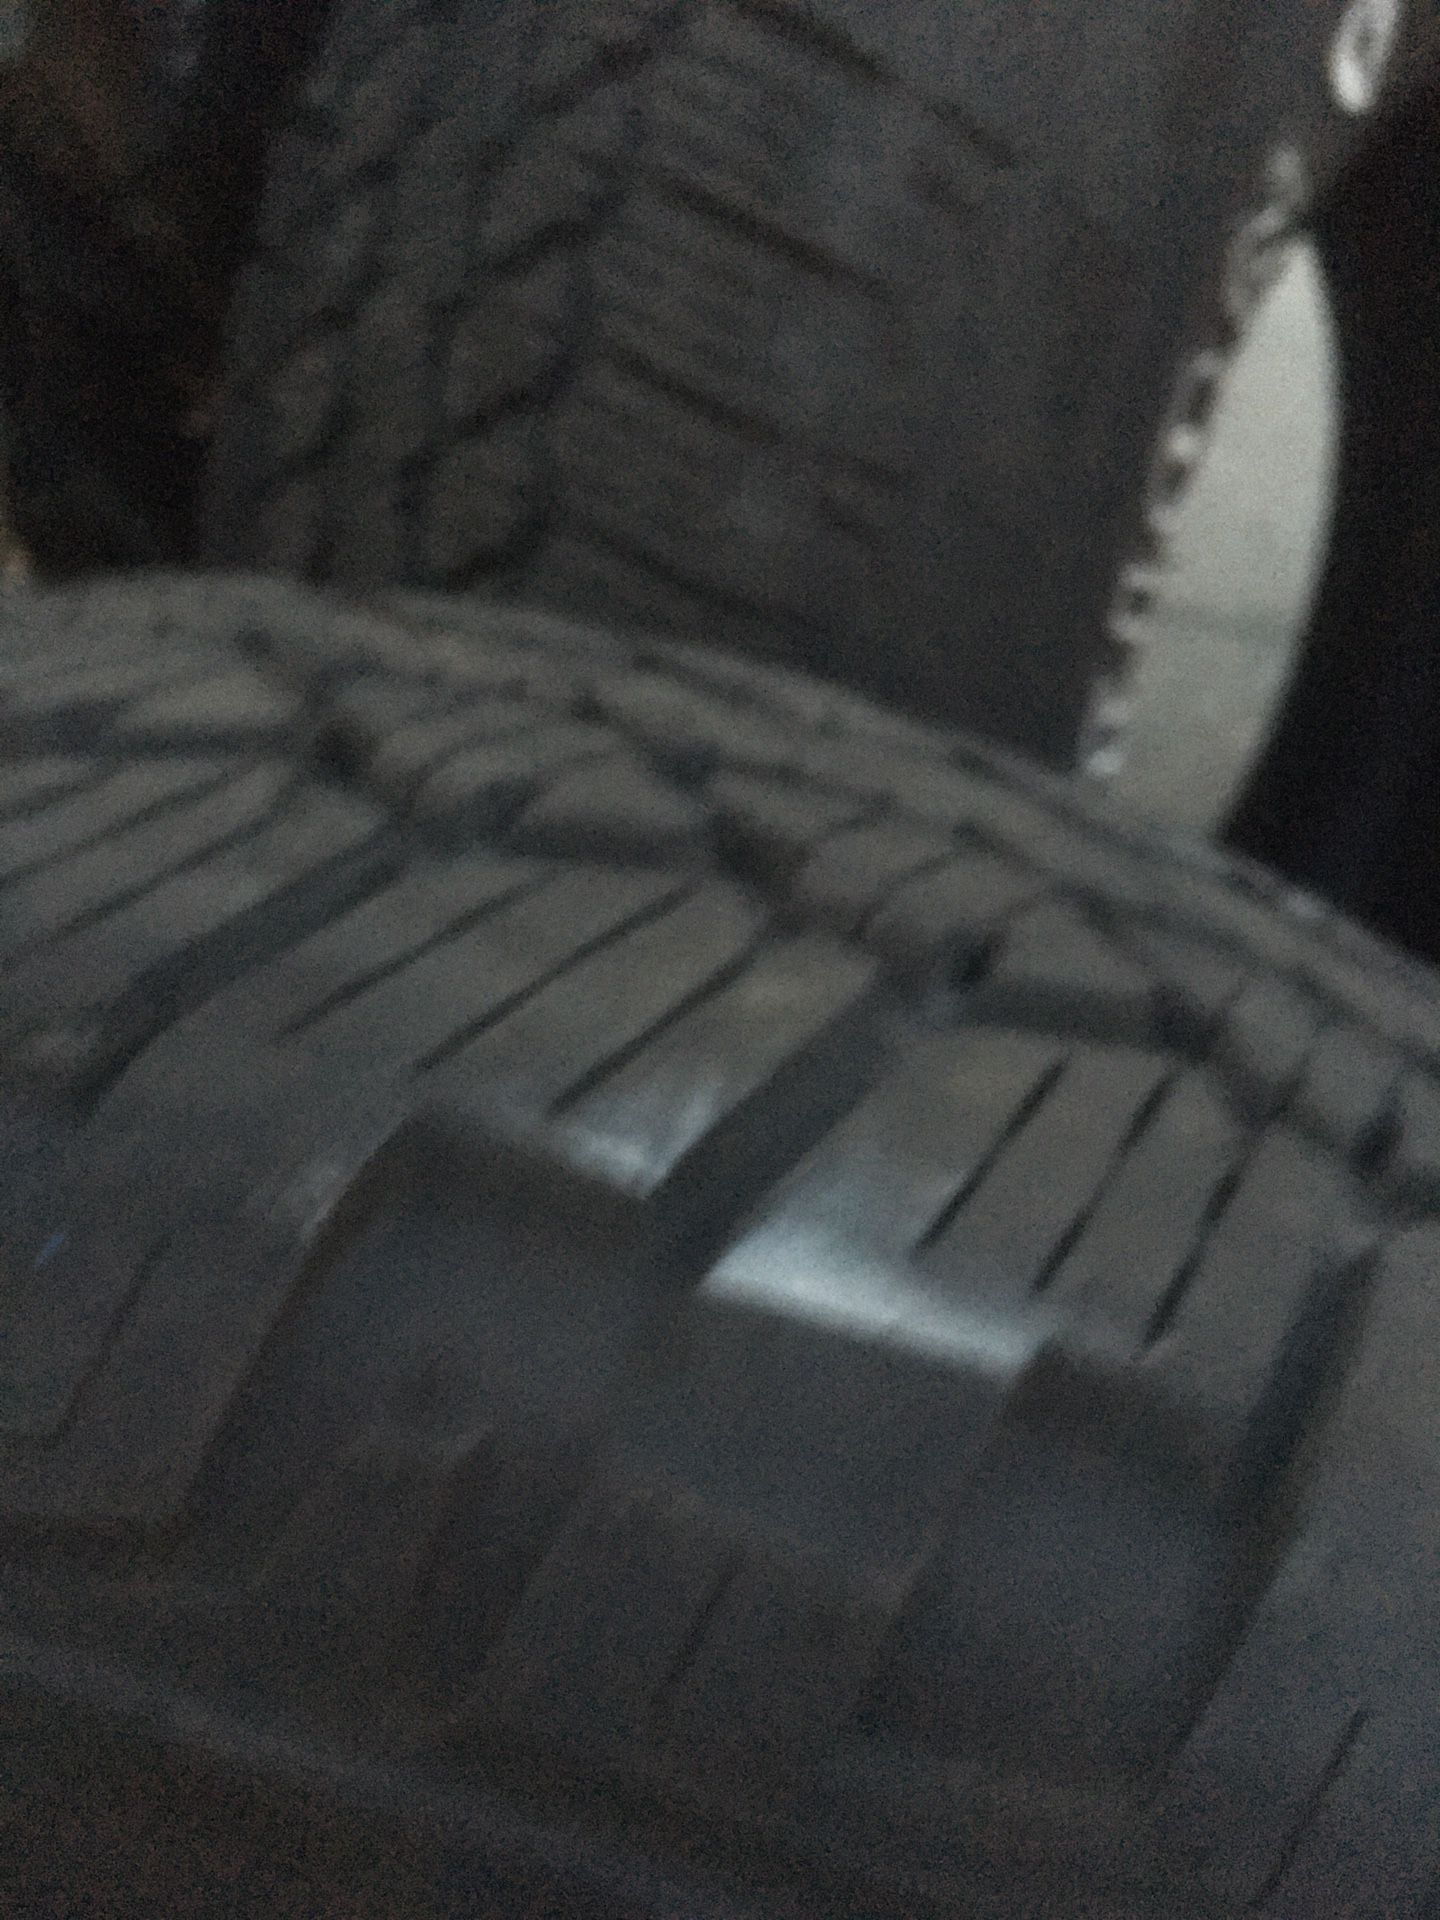 285/70/17 Tires Six Months Old